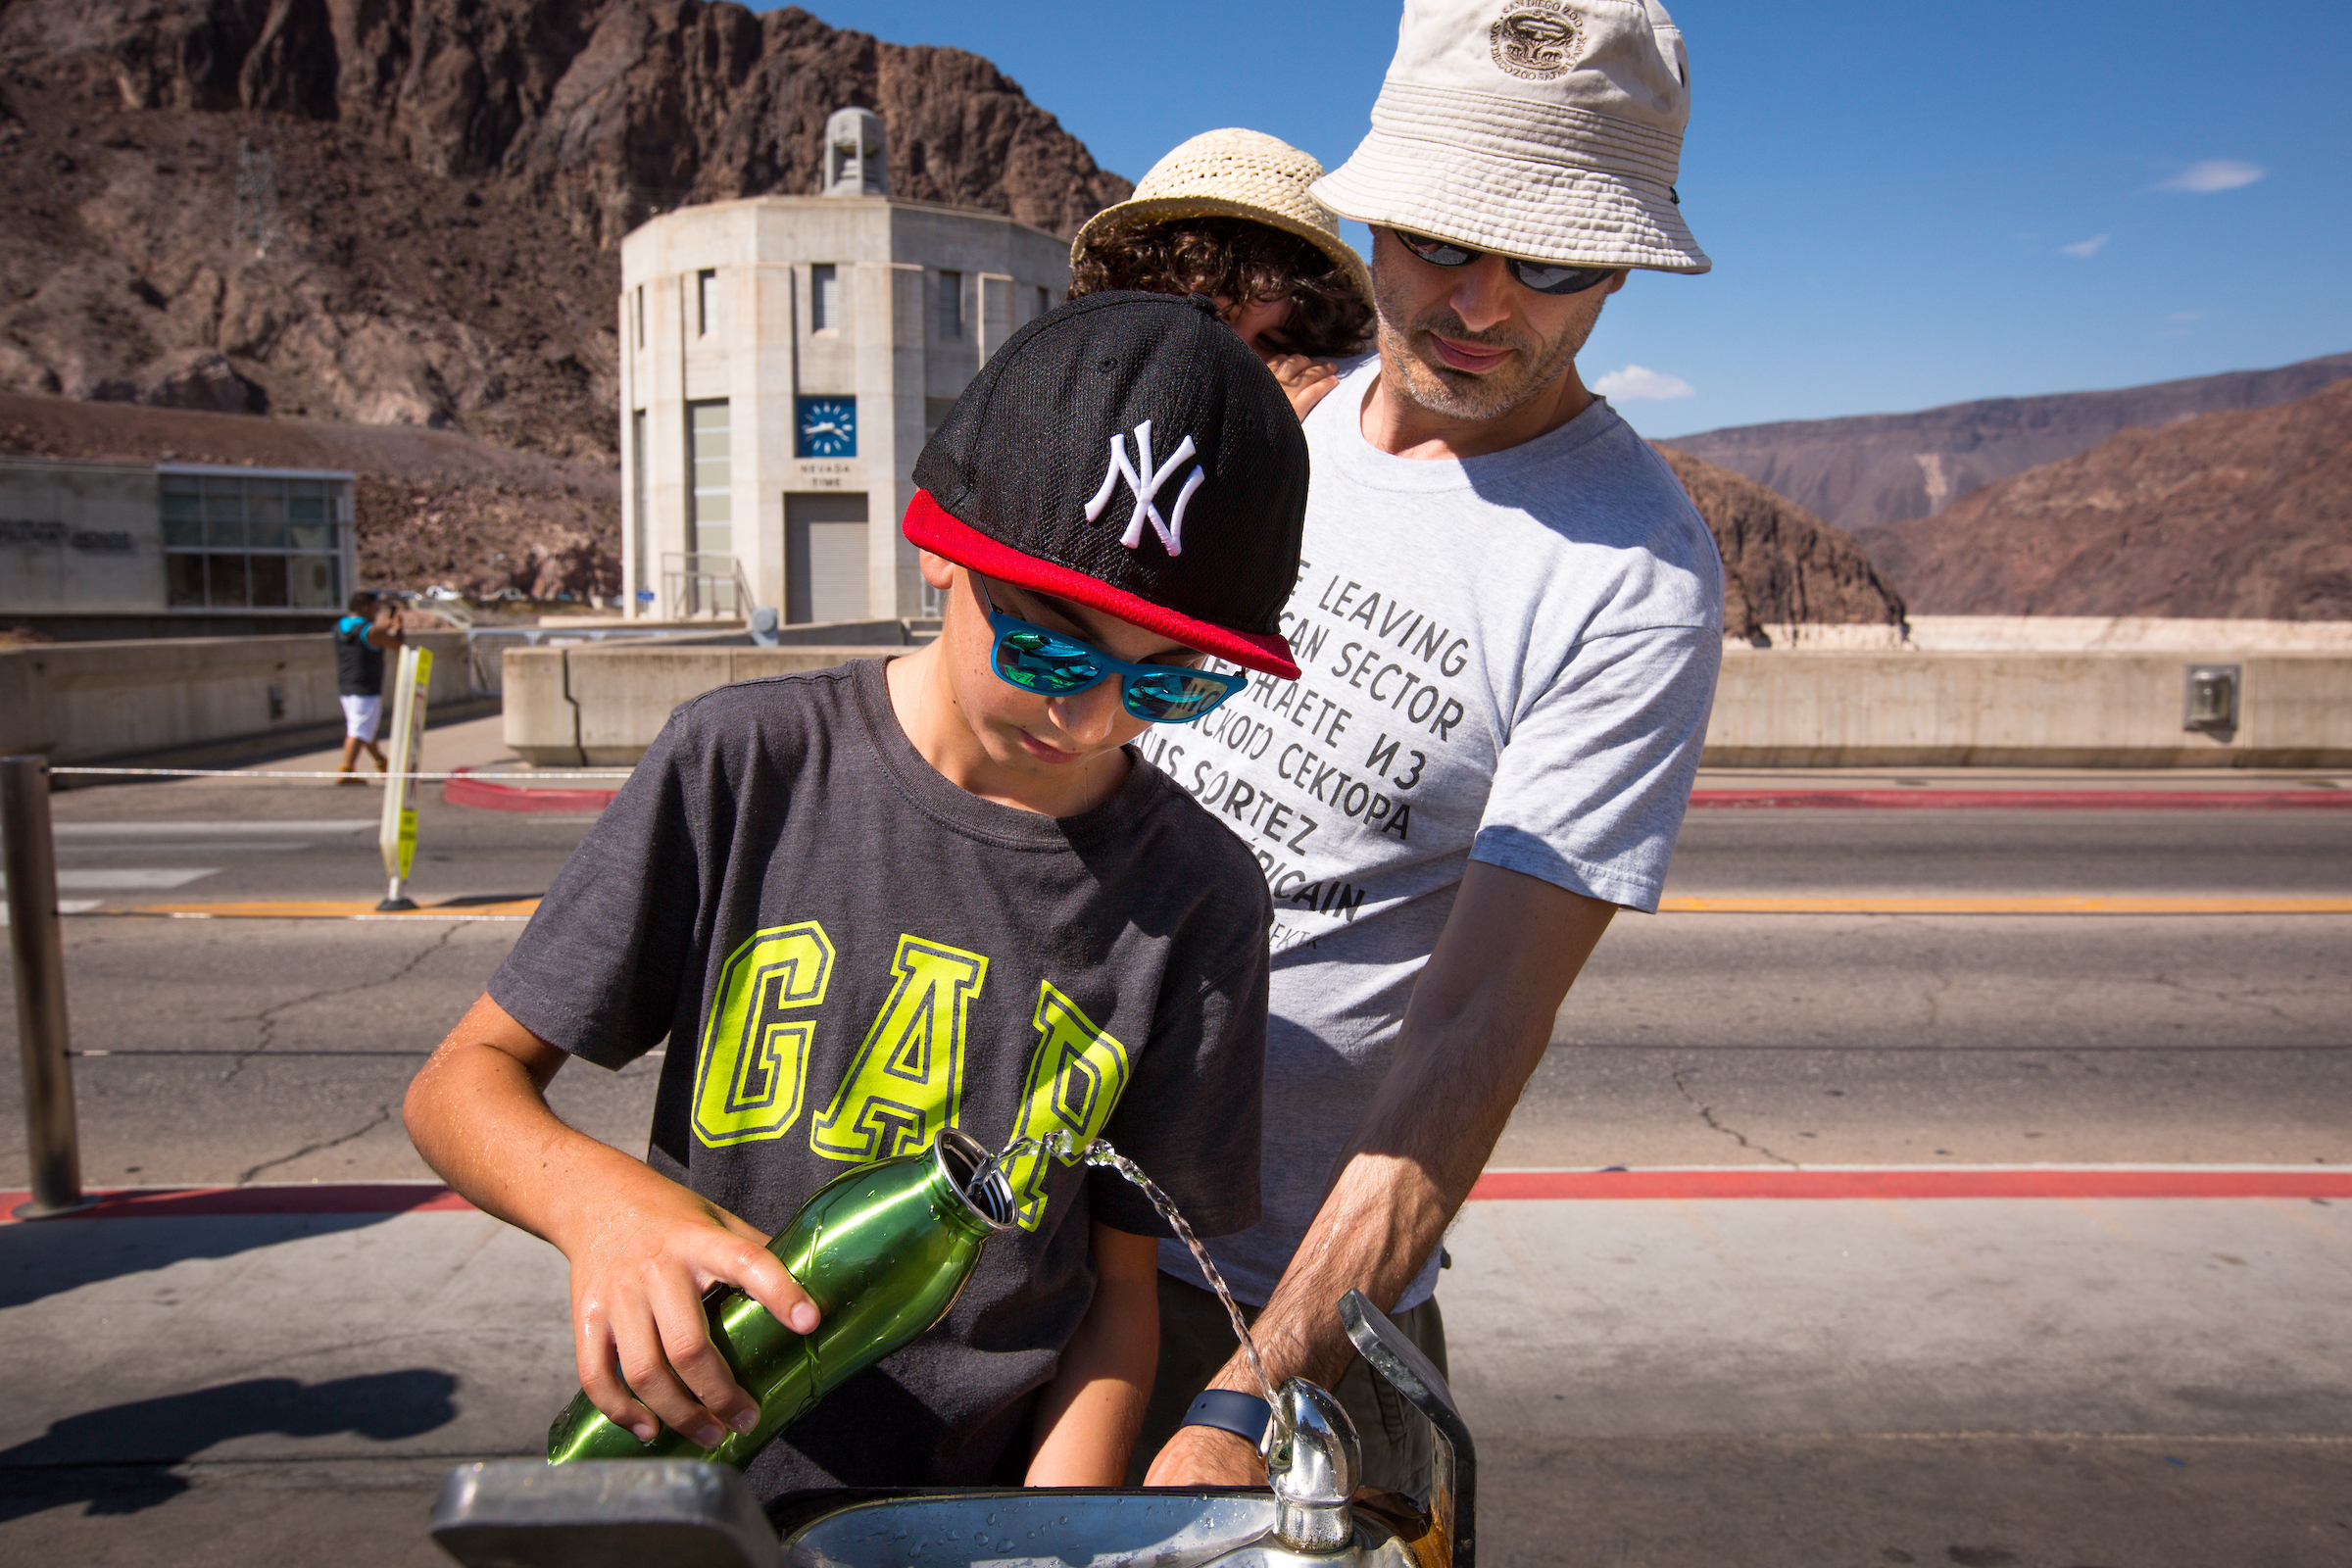 Tourists fill up a water bottle at Hoover Dam.